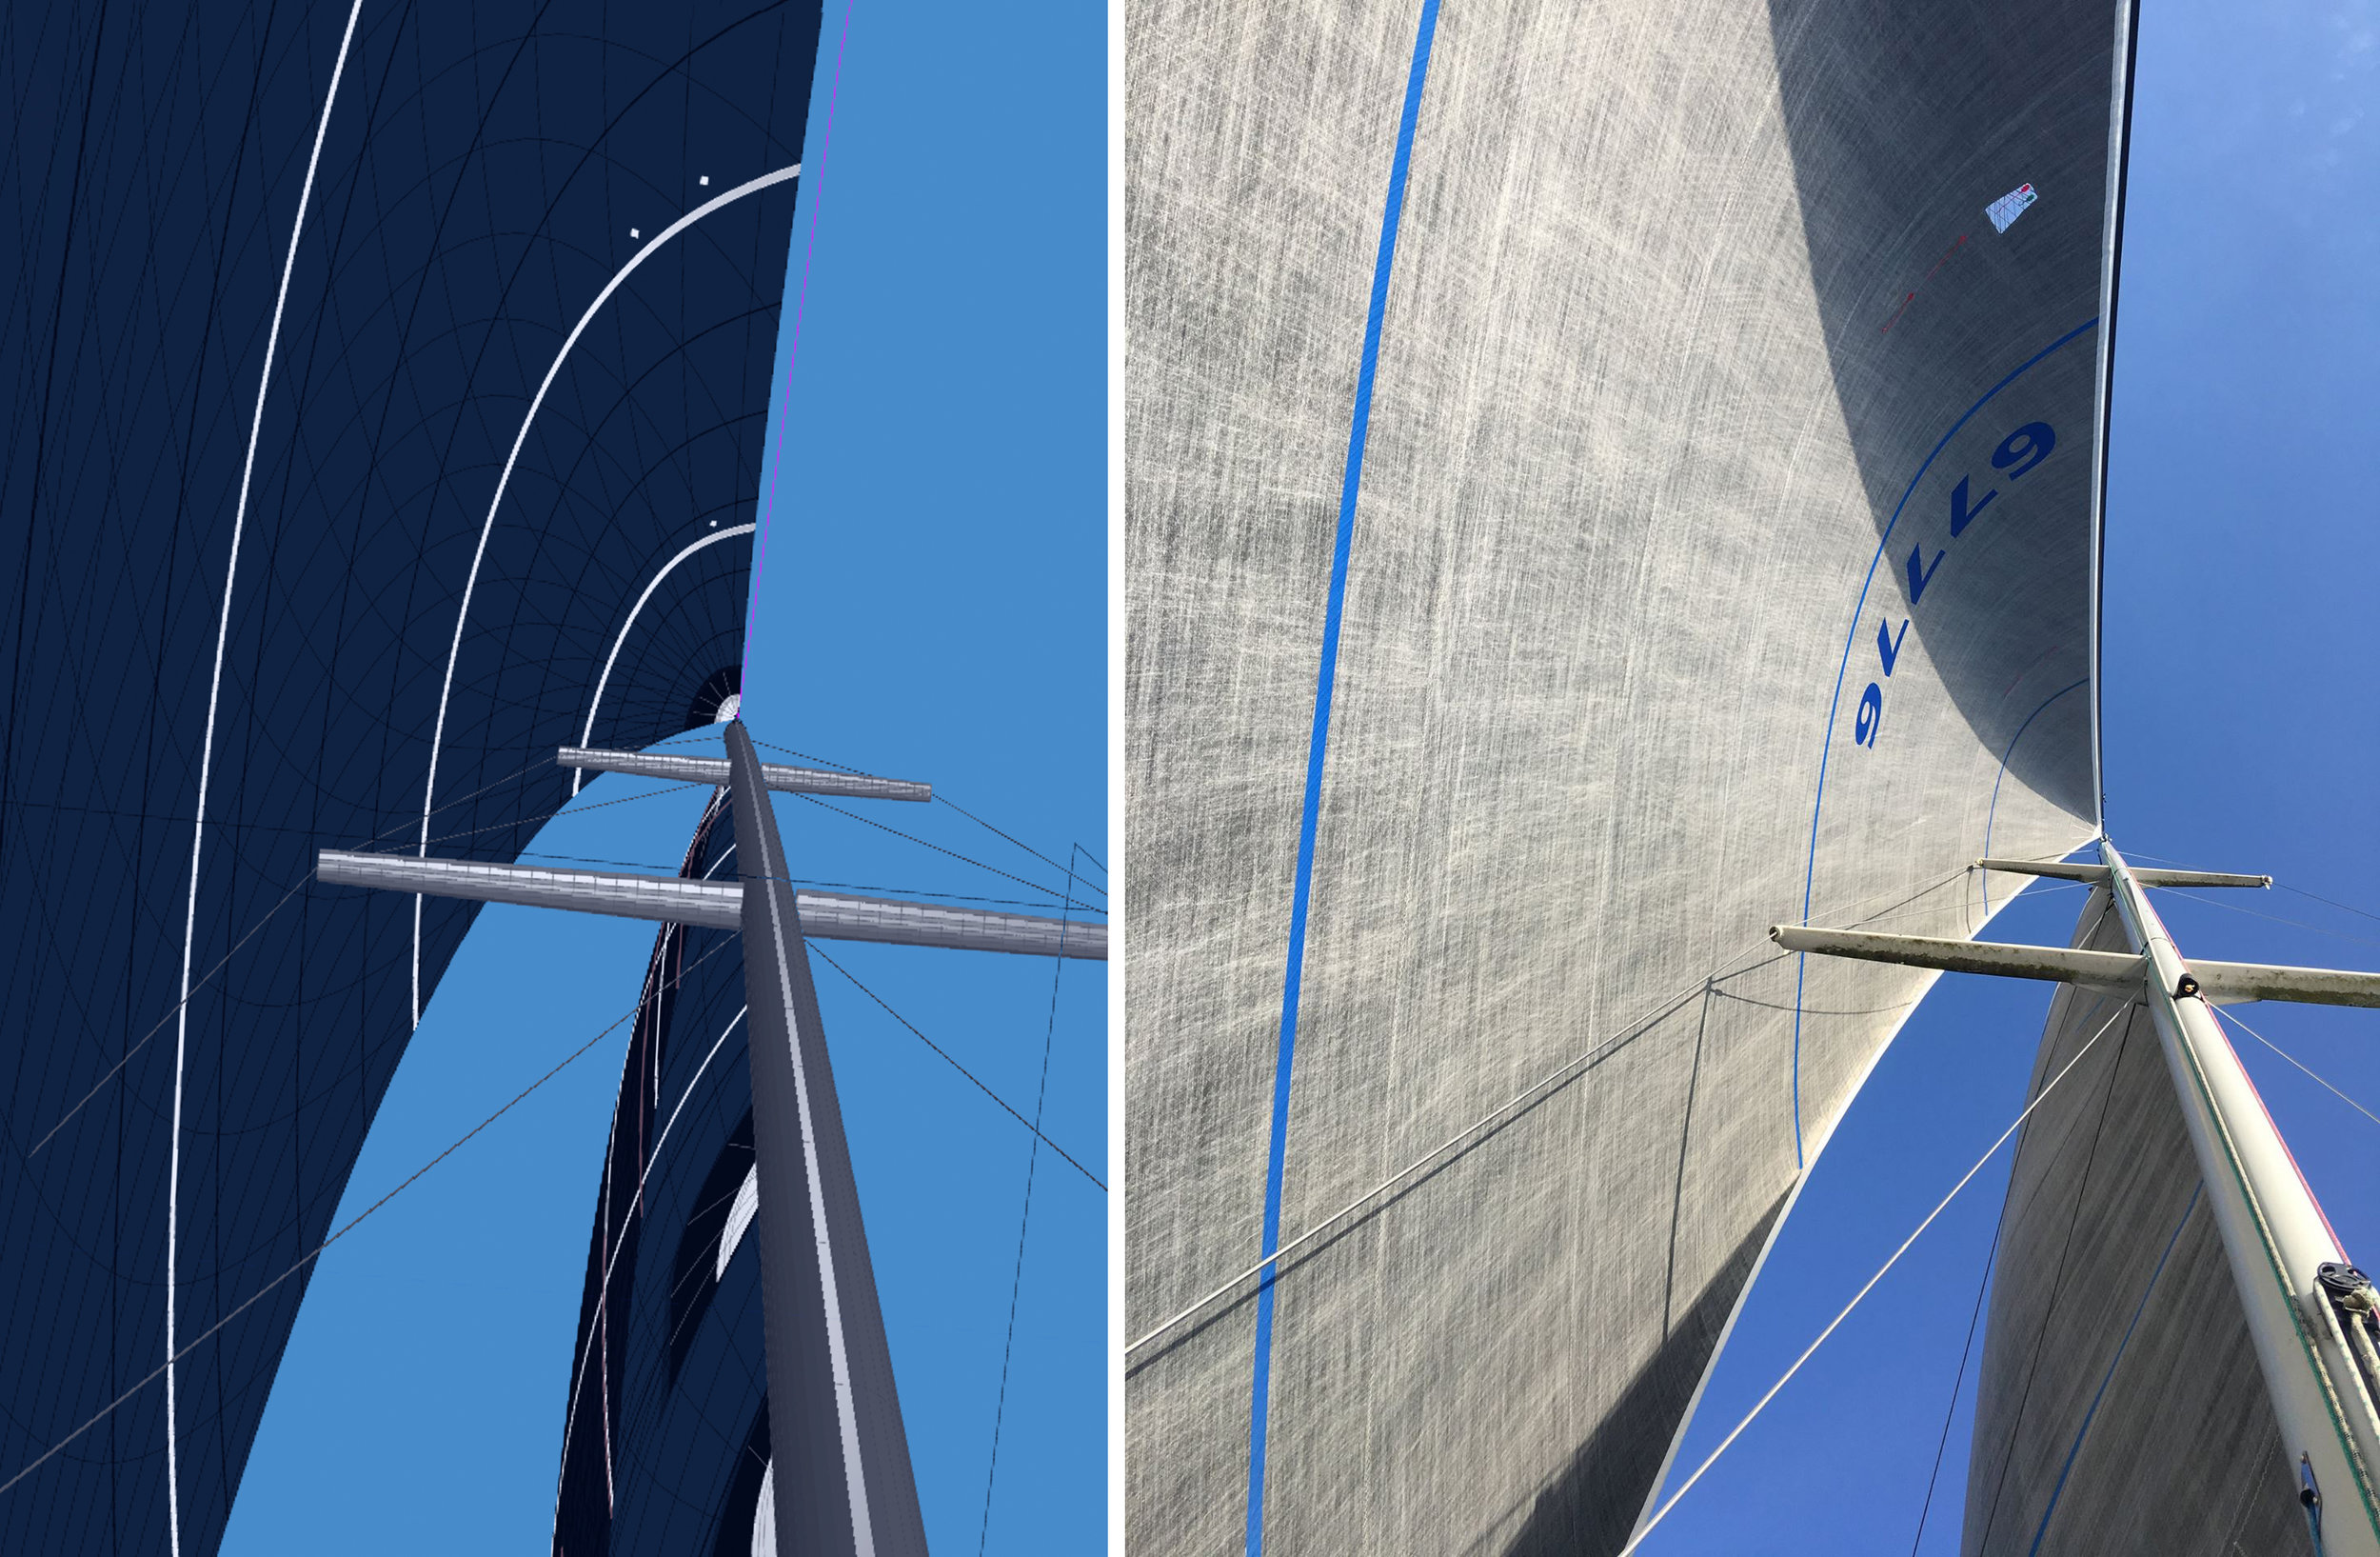 On the left is a computer 3D rendering of a Light No. 1 Genoa design. On the right is the same sail flying. The design and the completed sail a re virtual match.